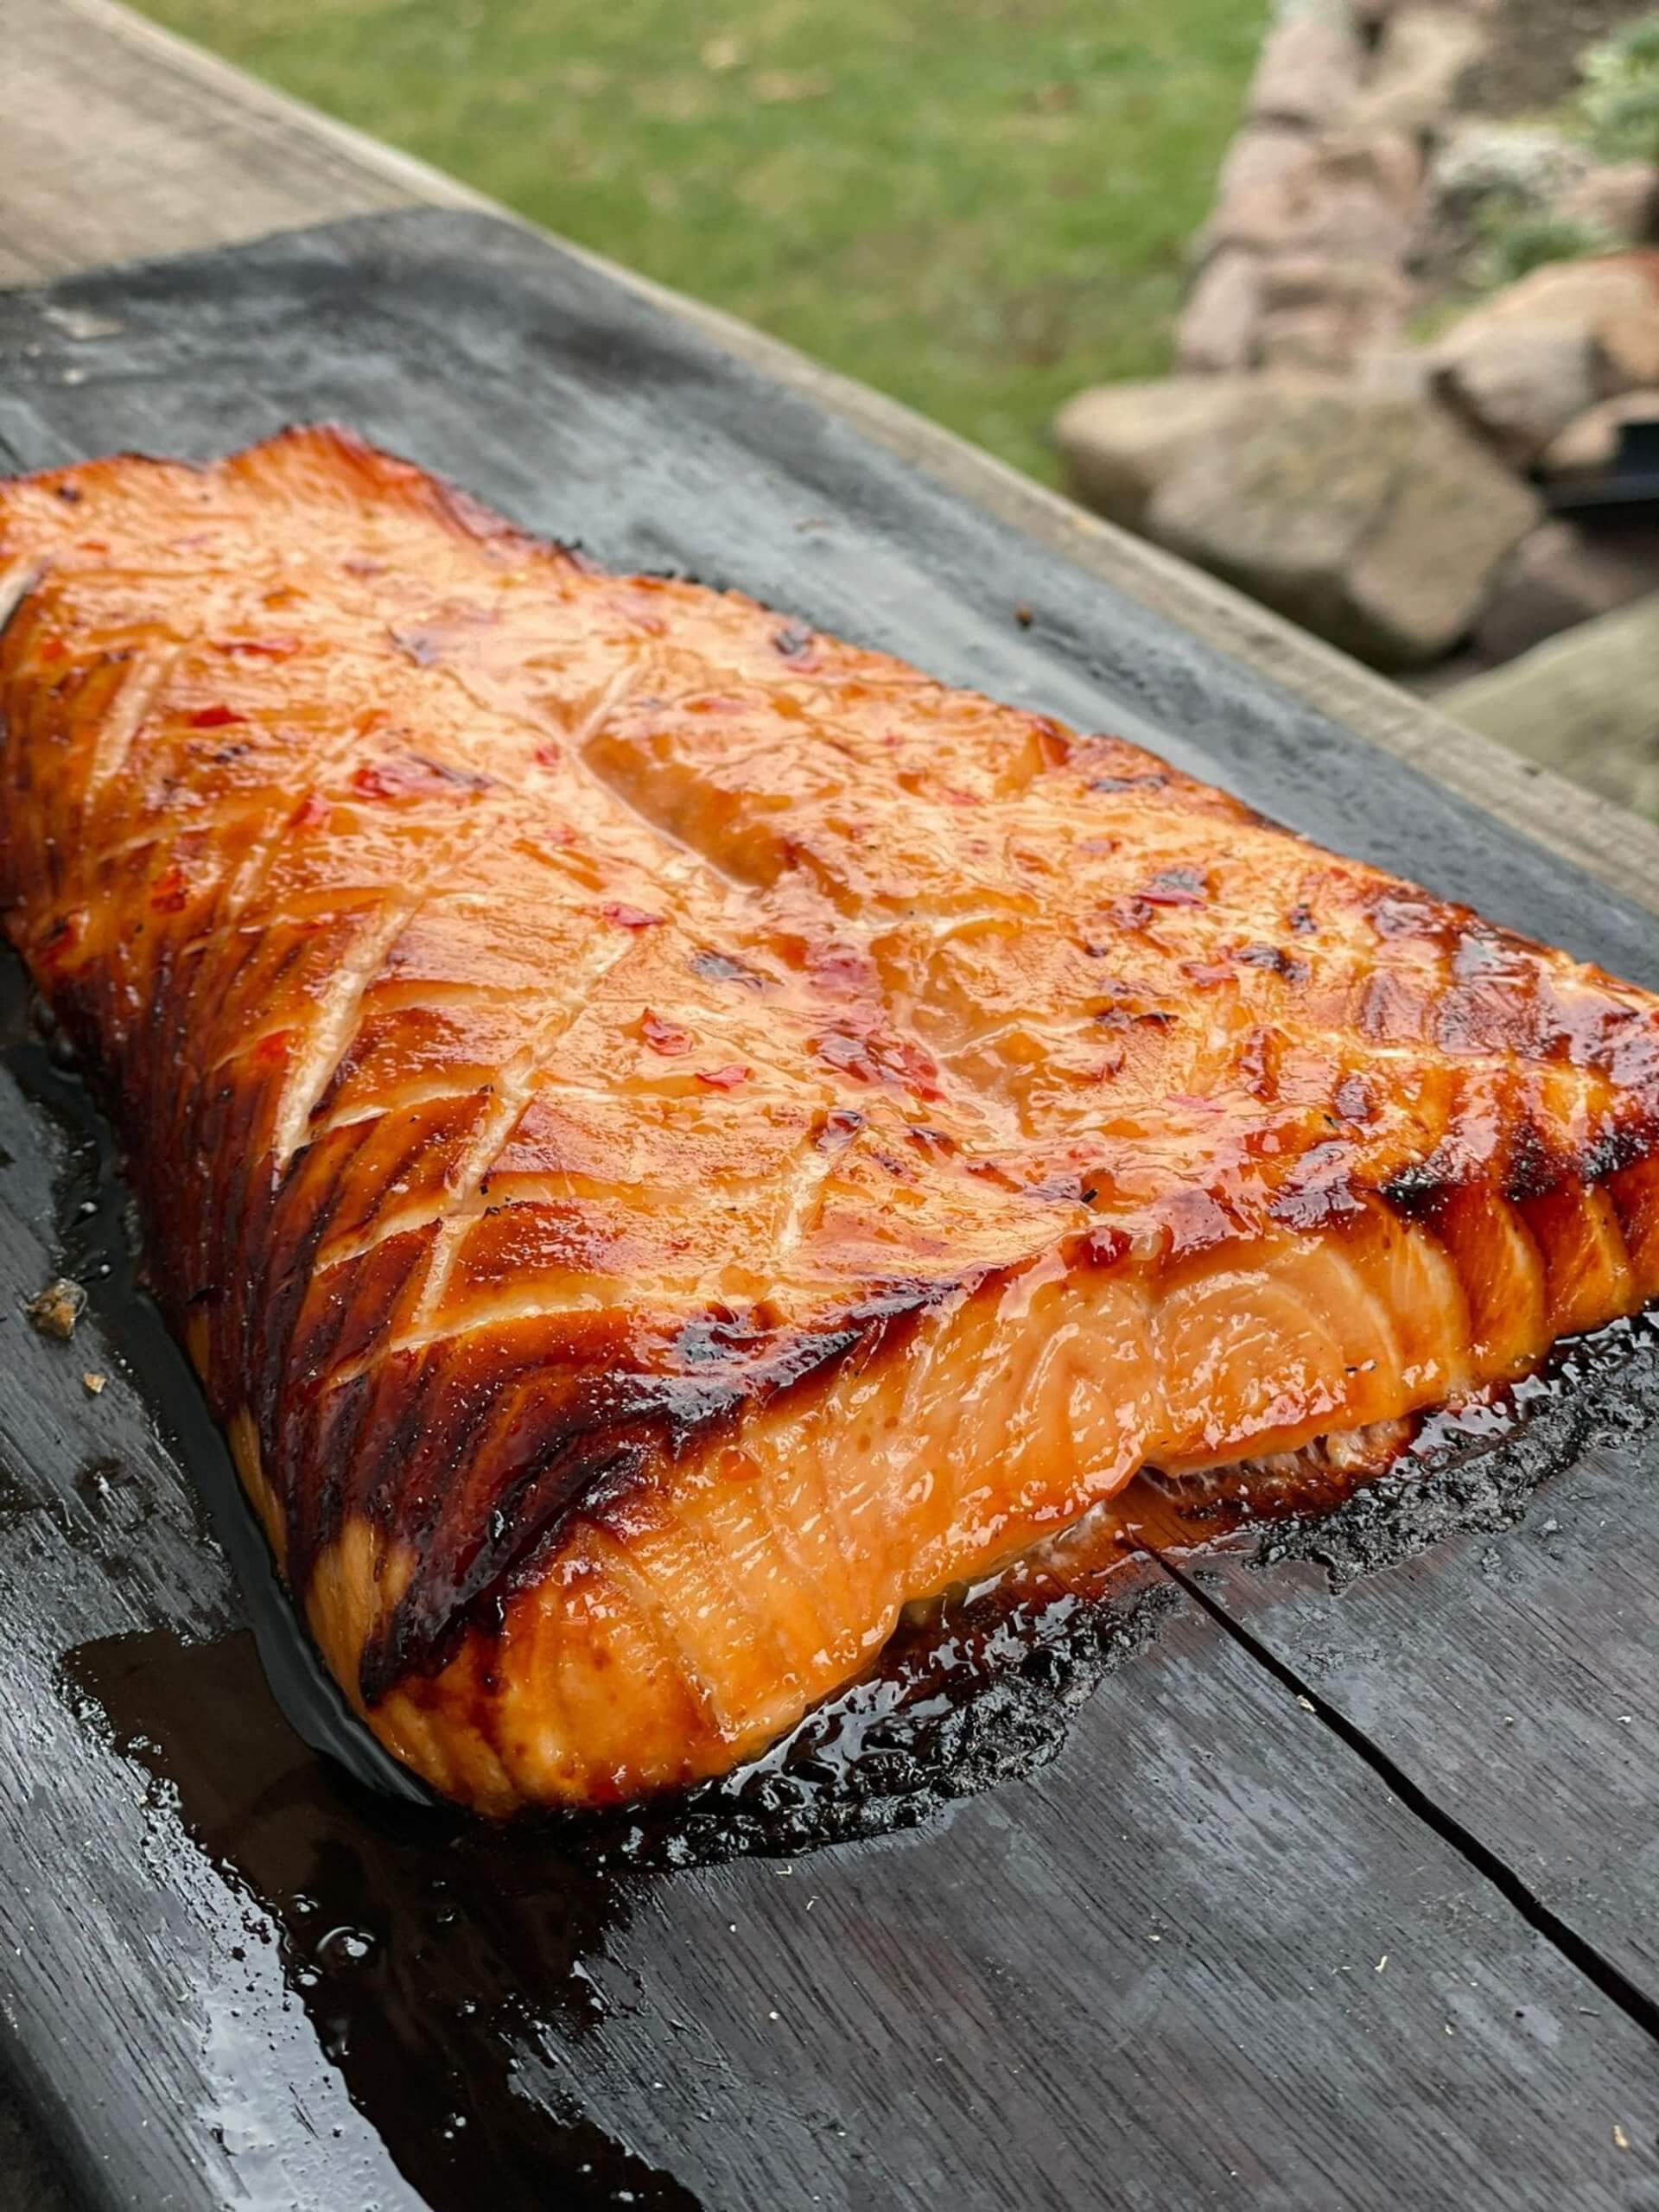 salmon cooked in a wood fired pizza oven